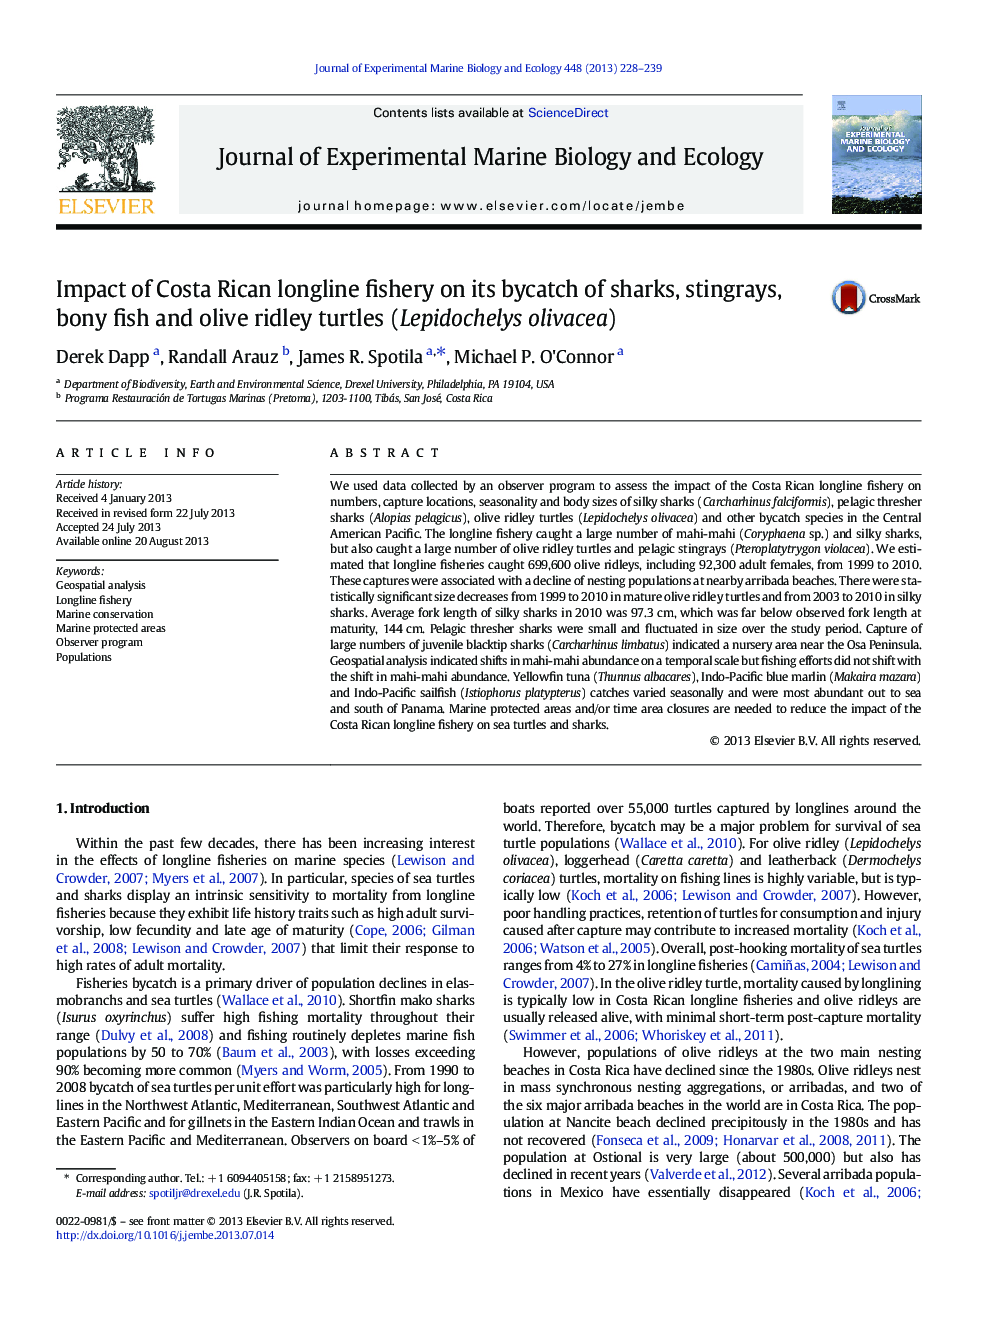 Impact of Costa Rican longline fishery on its bycatch of sharks, stingrays, bony fish and olive ridley turtles (Lepidochelys olivacea)